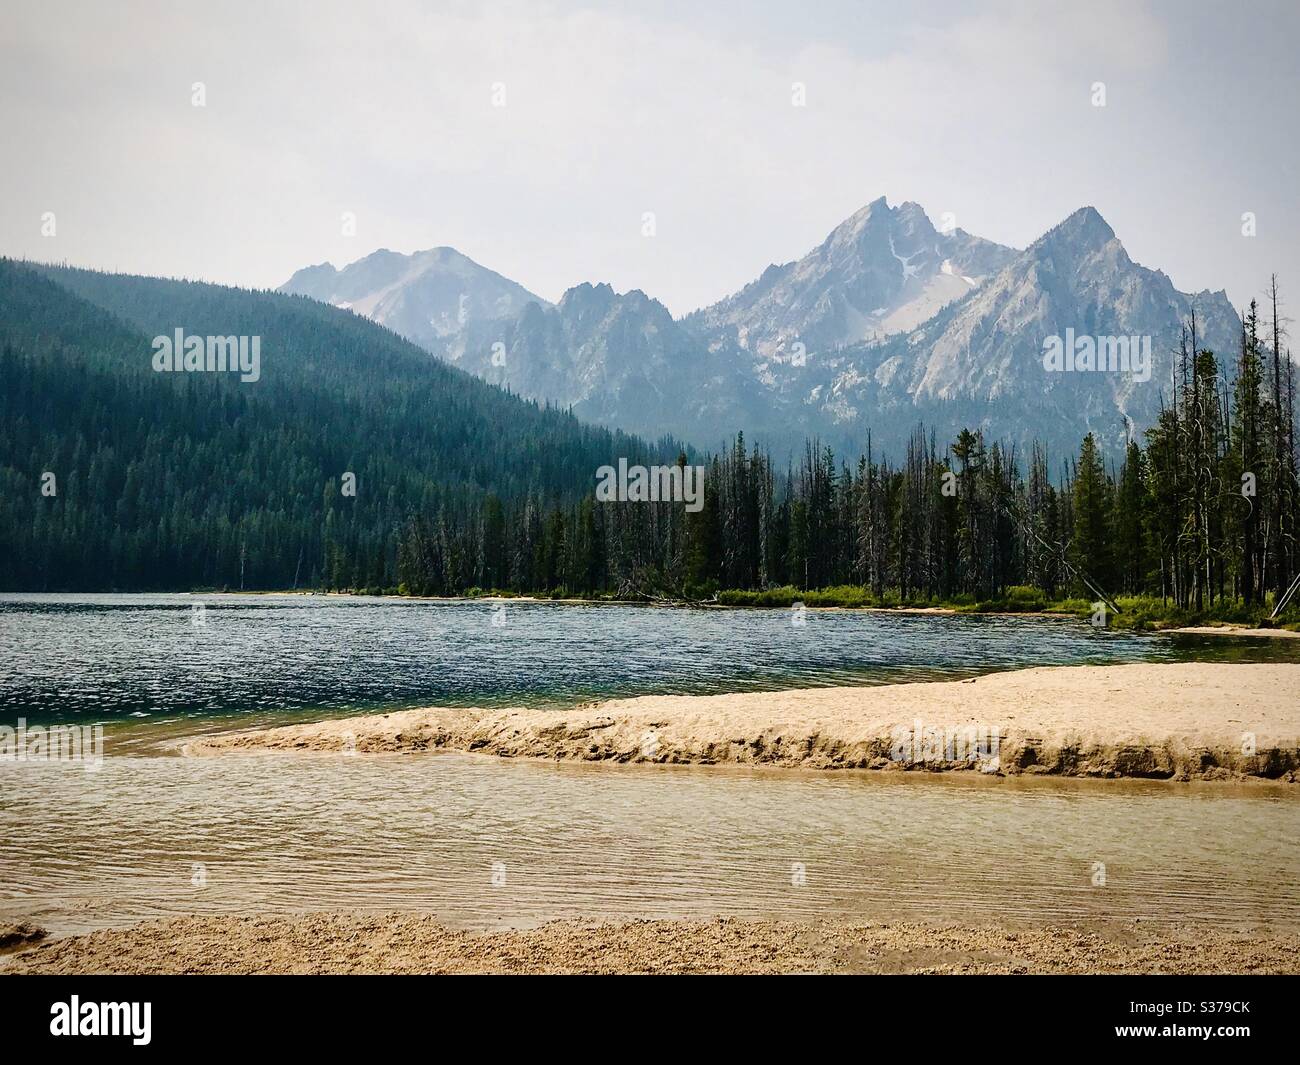 A mountain lake with a scenic backdrop of pine trees and the Rocky Mountains. Stock Photo